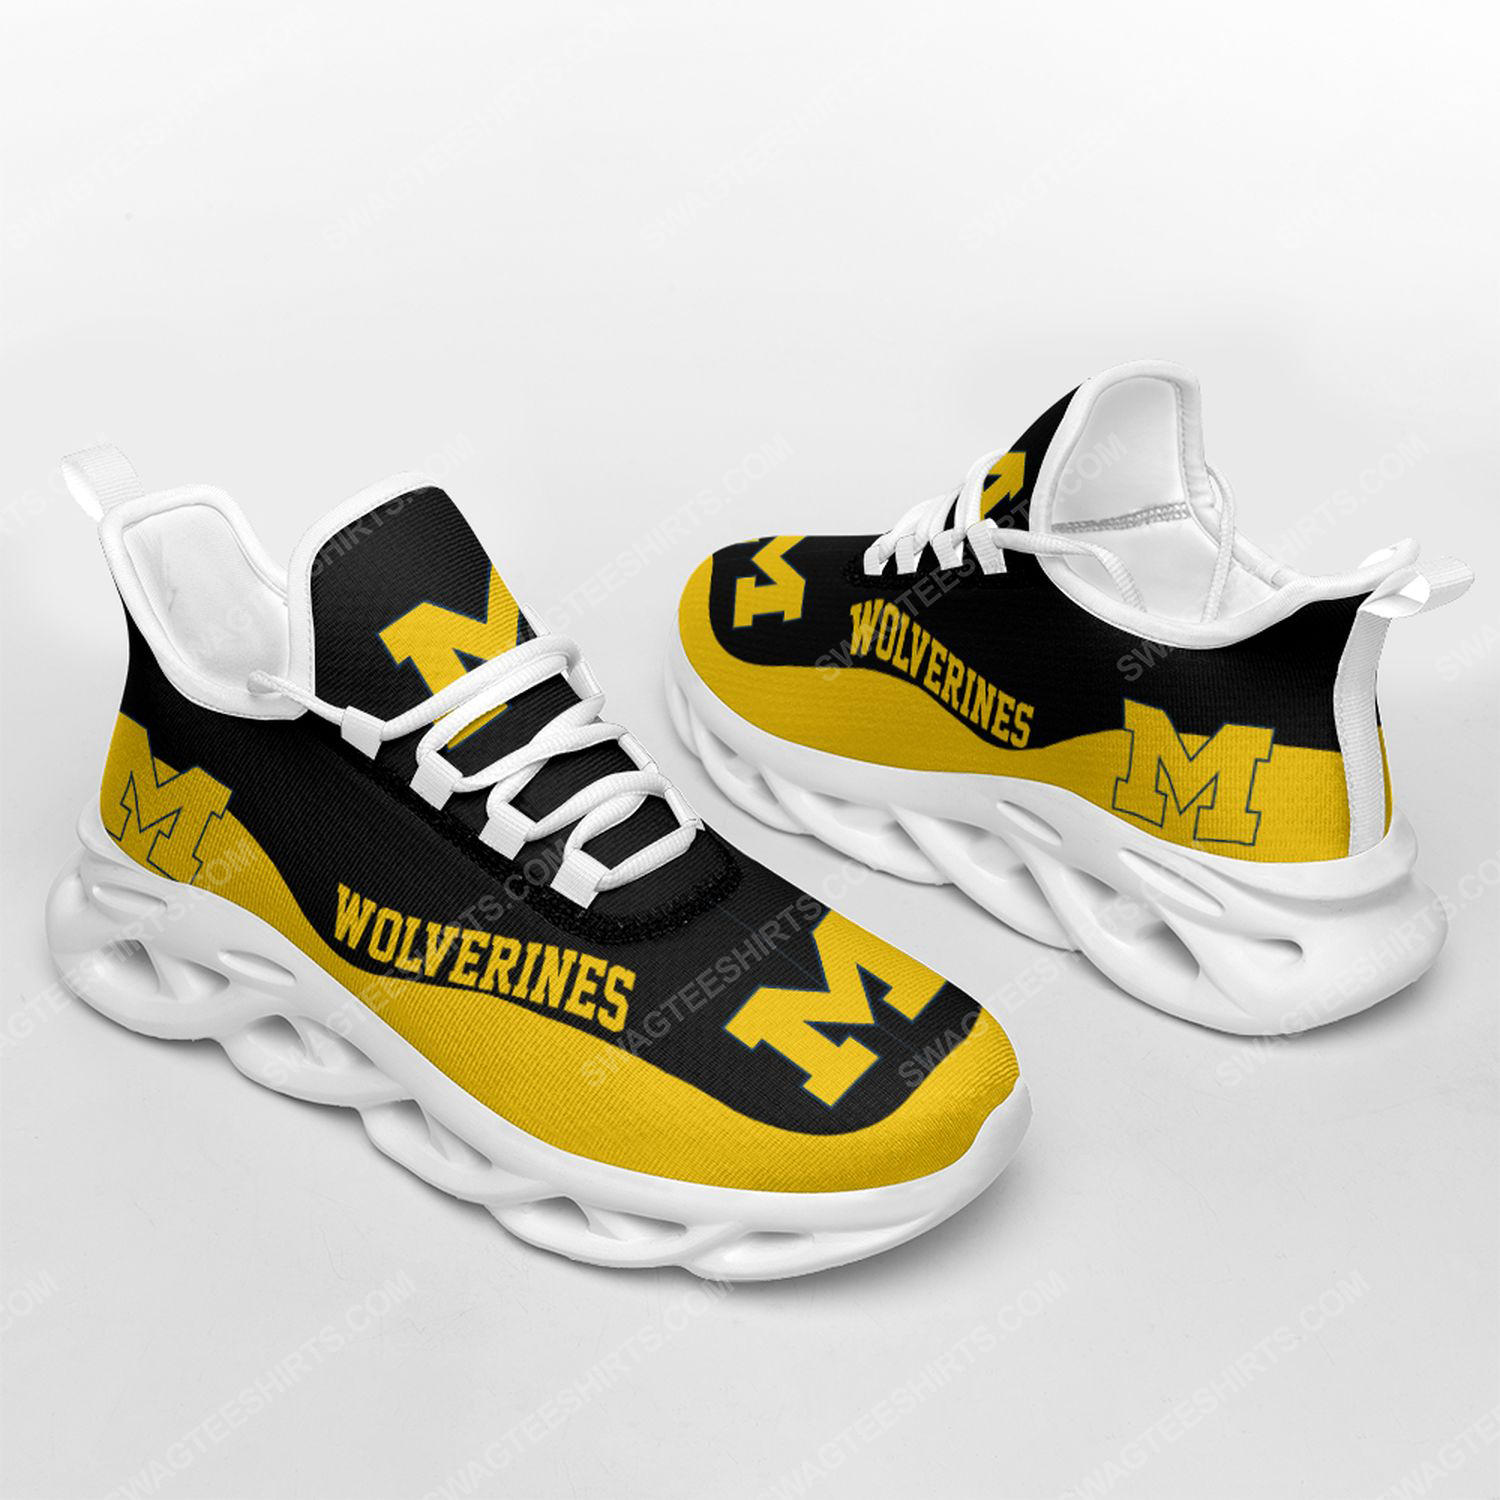 [special edition] The michigan wolverines football team max soul shoes – Maria